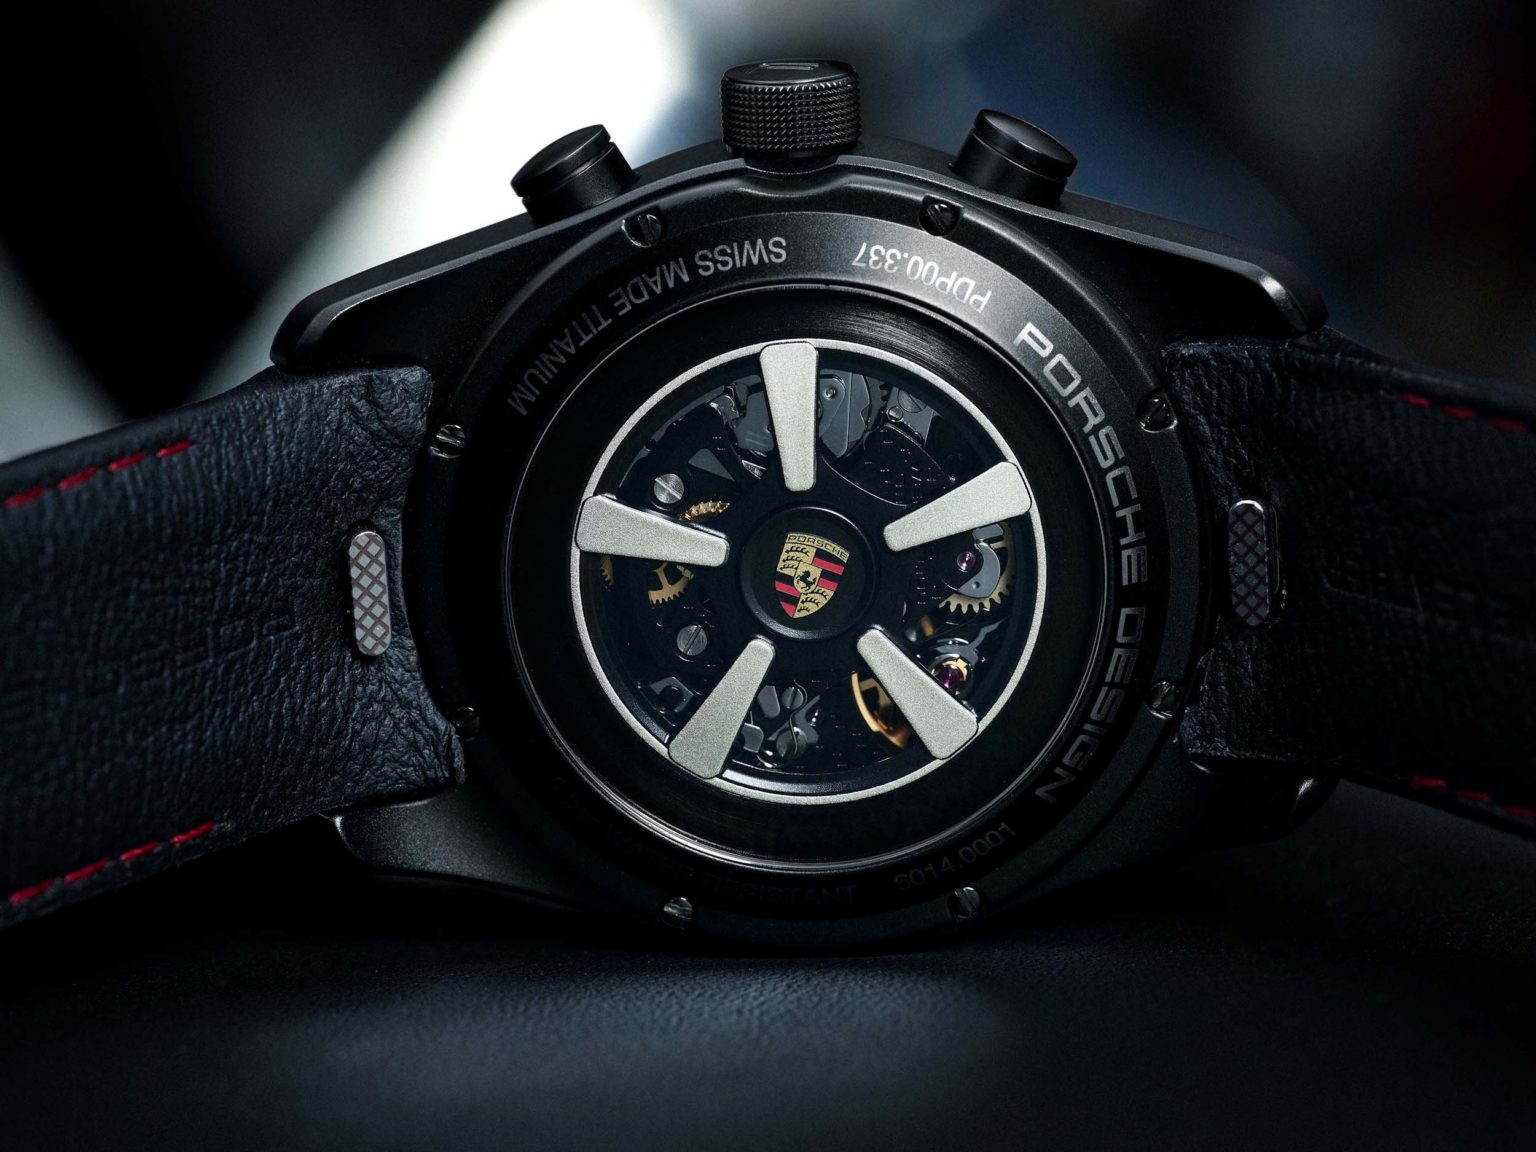 Porsche's new custom chronograph takes its design cues from the 911.